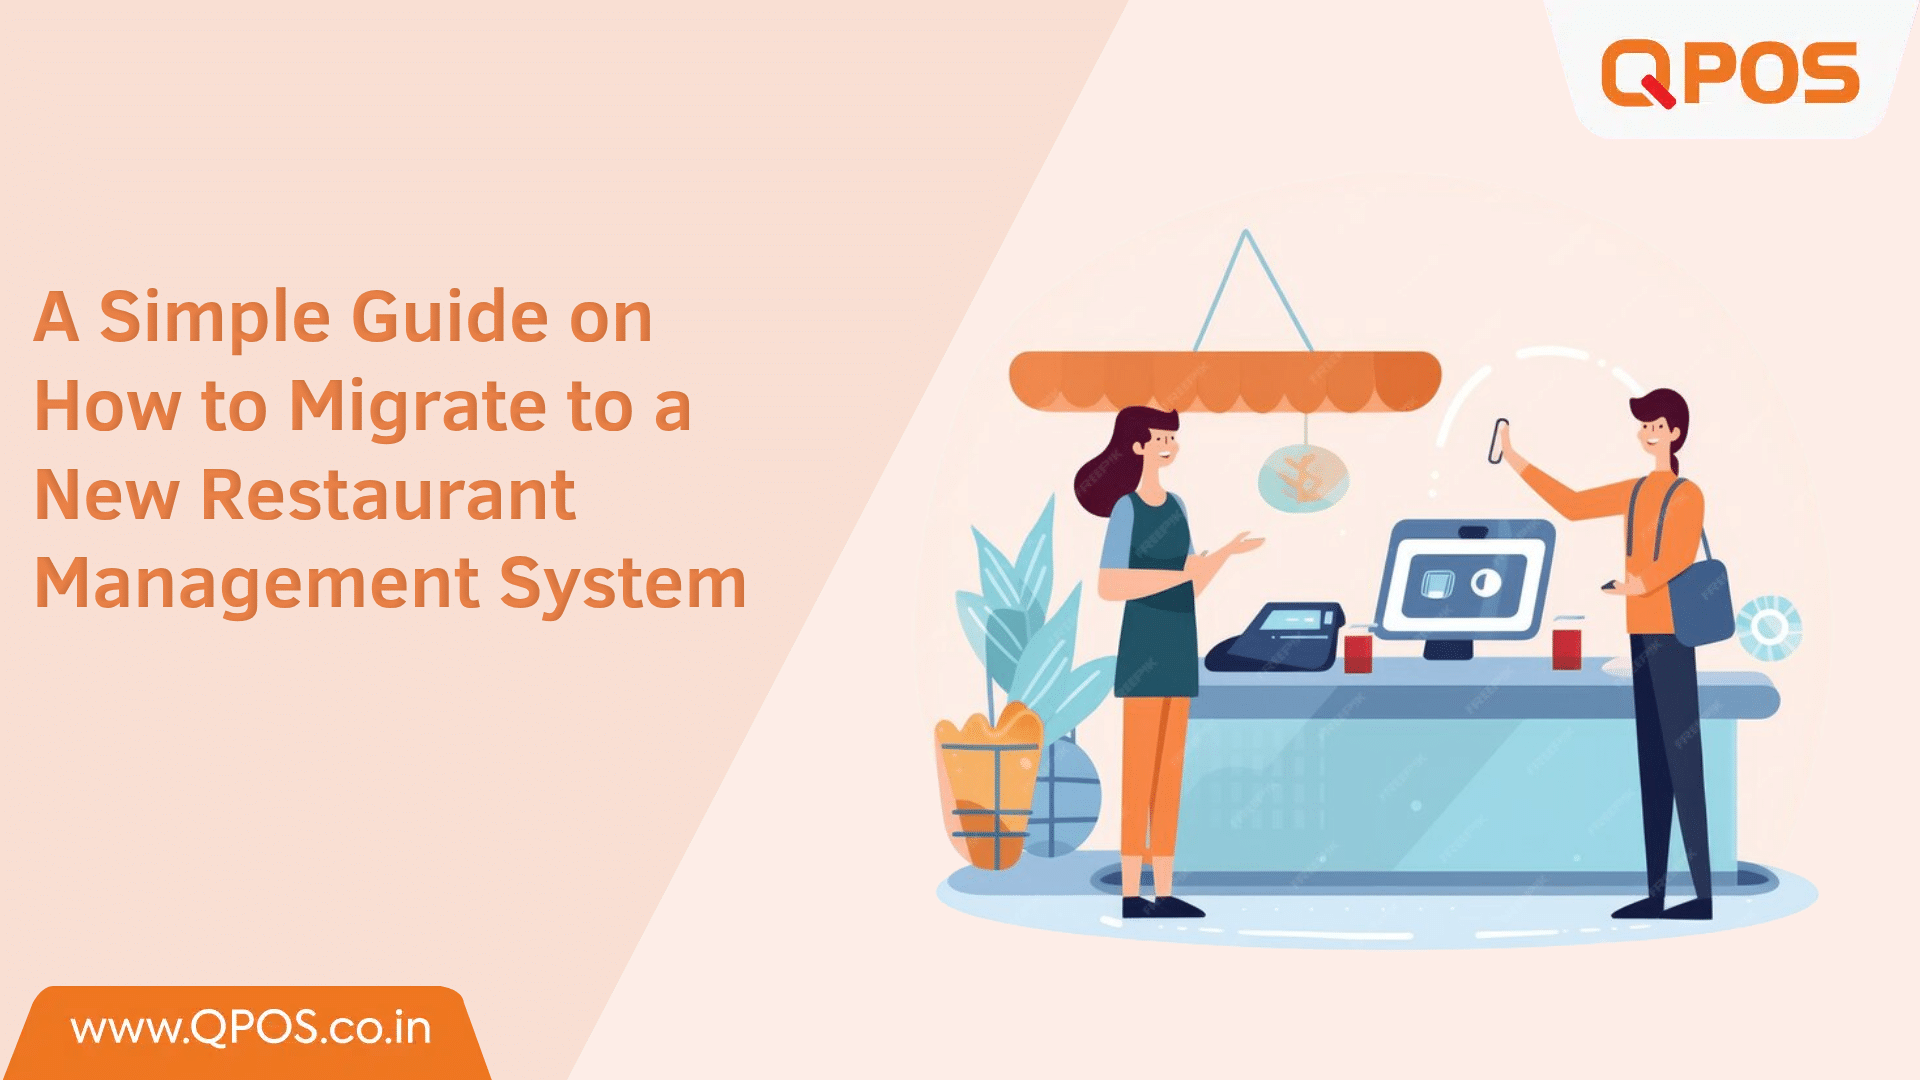 A Simple Guide on How to Migrate to A New Restaurant Management System